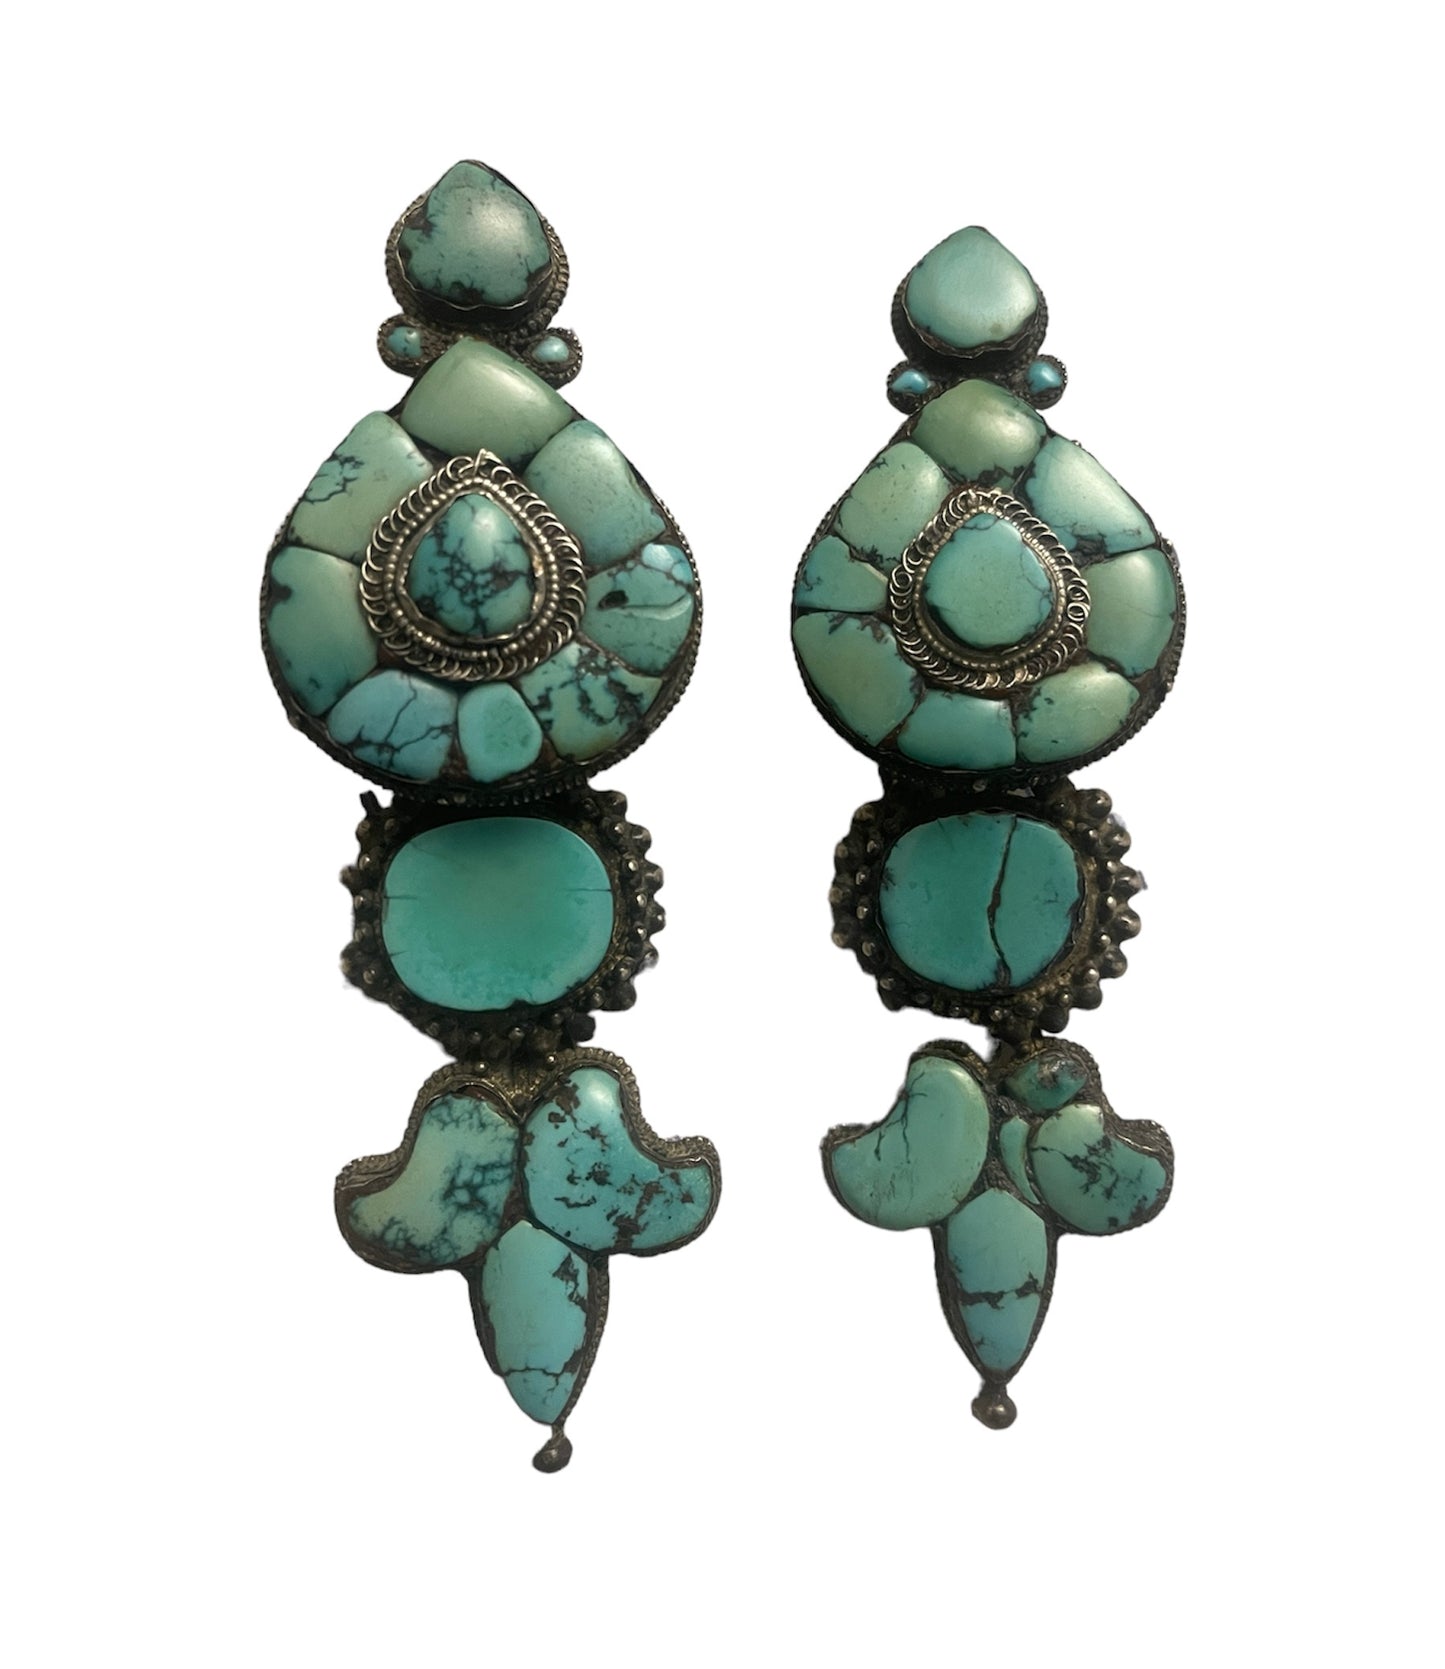 A pair of antique Tibetan turquoise and silver ear pendants